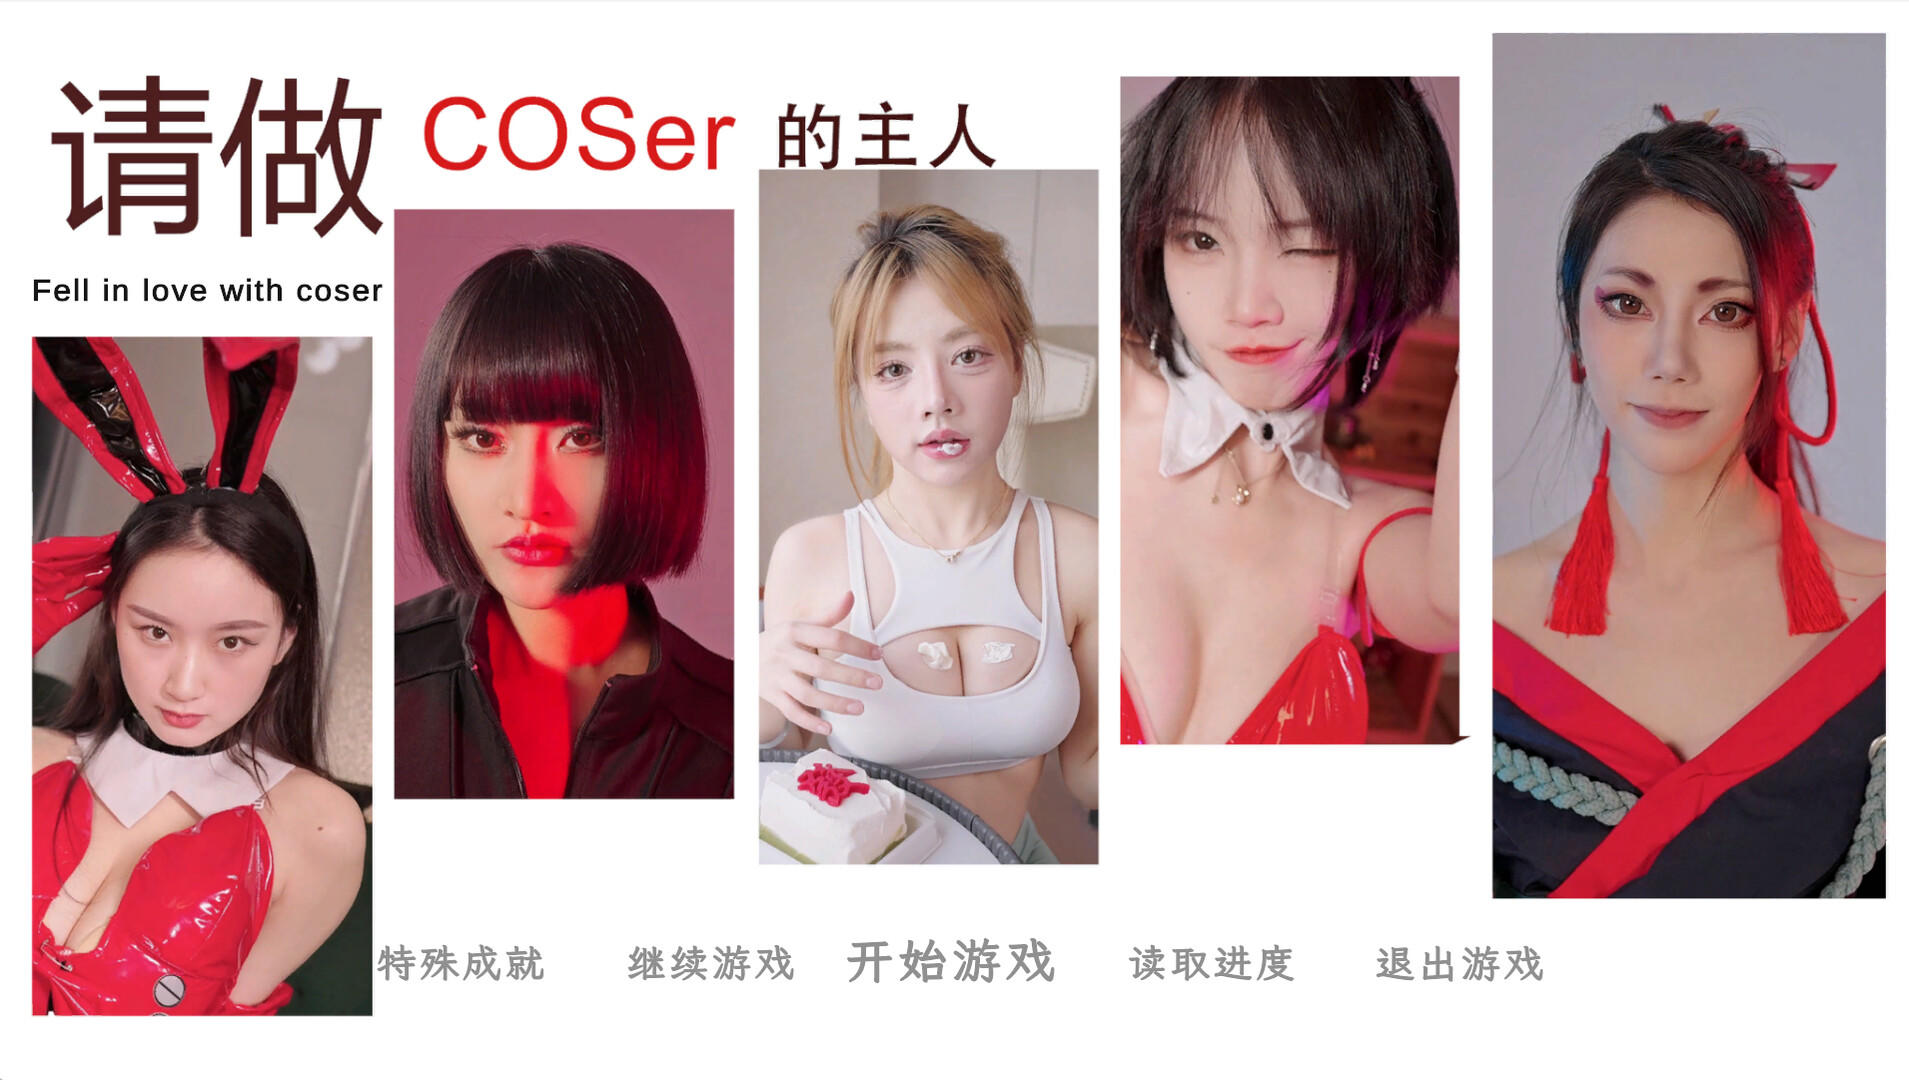 Screenshot 1 of Fell in love with coser 